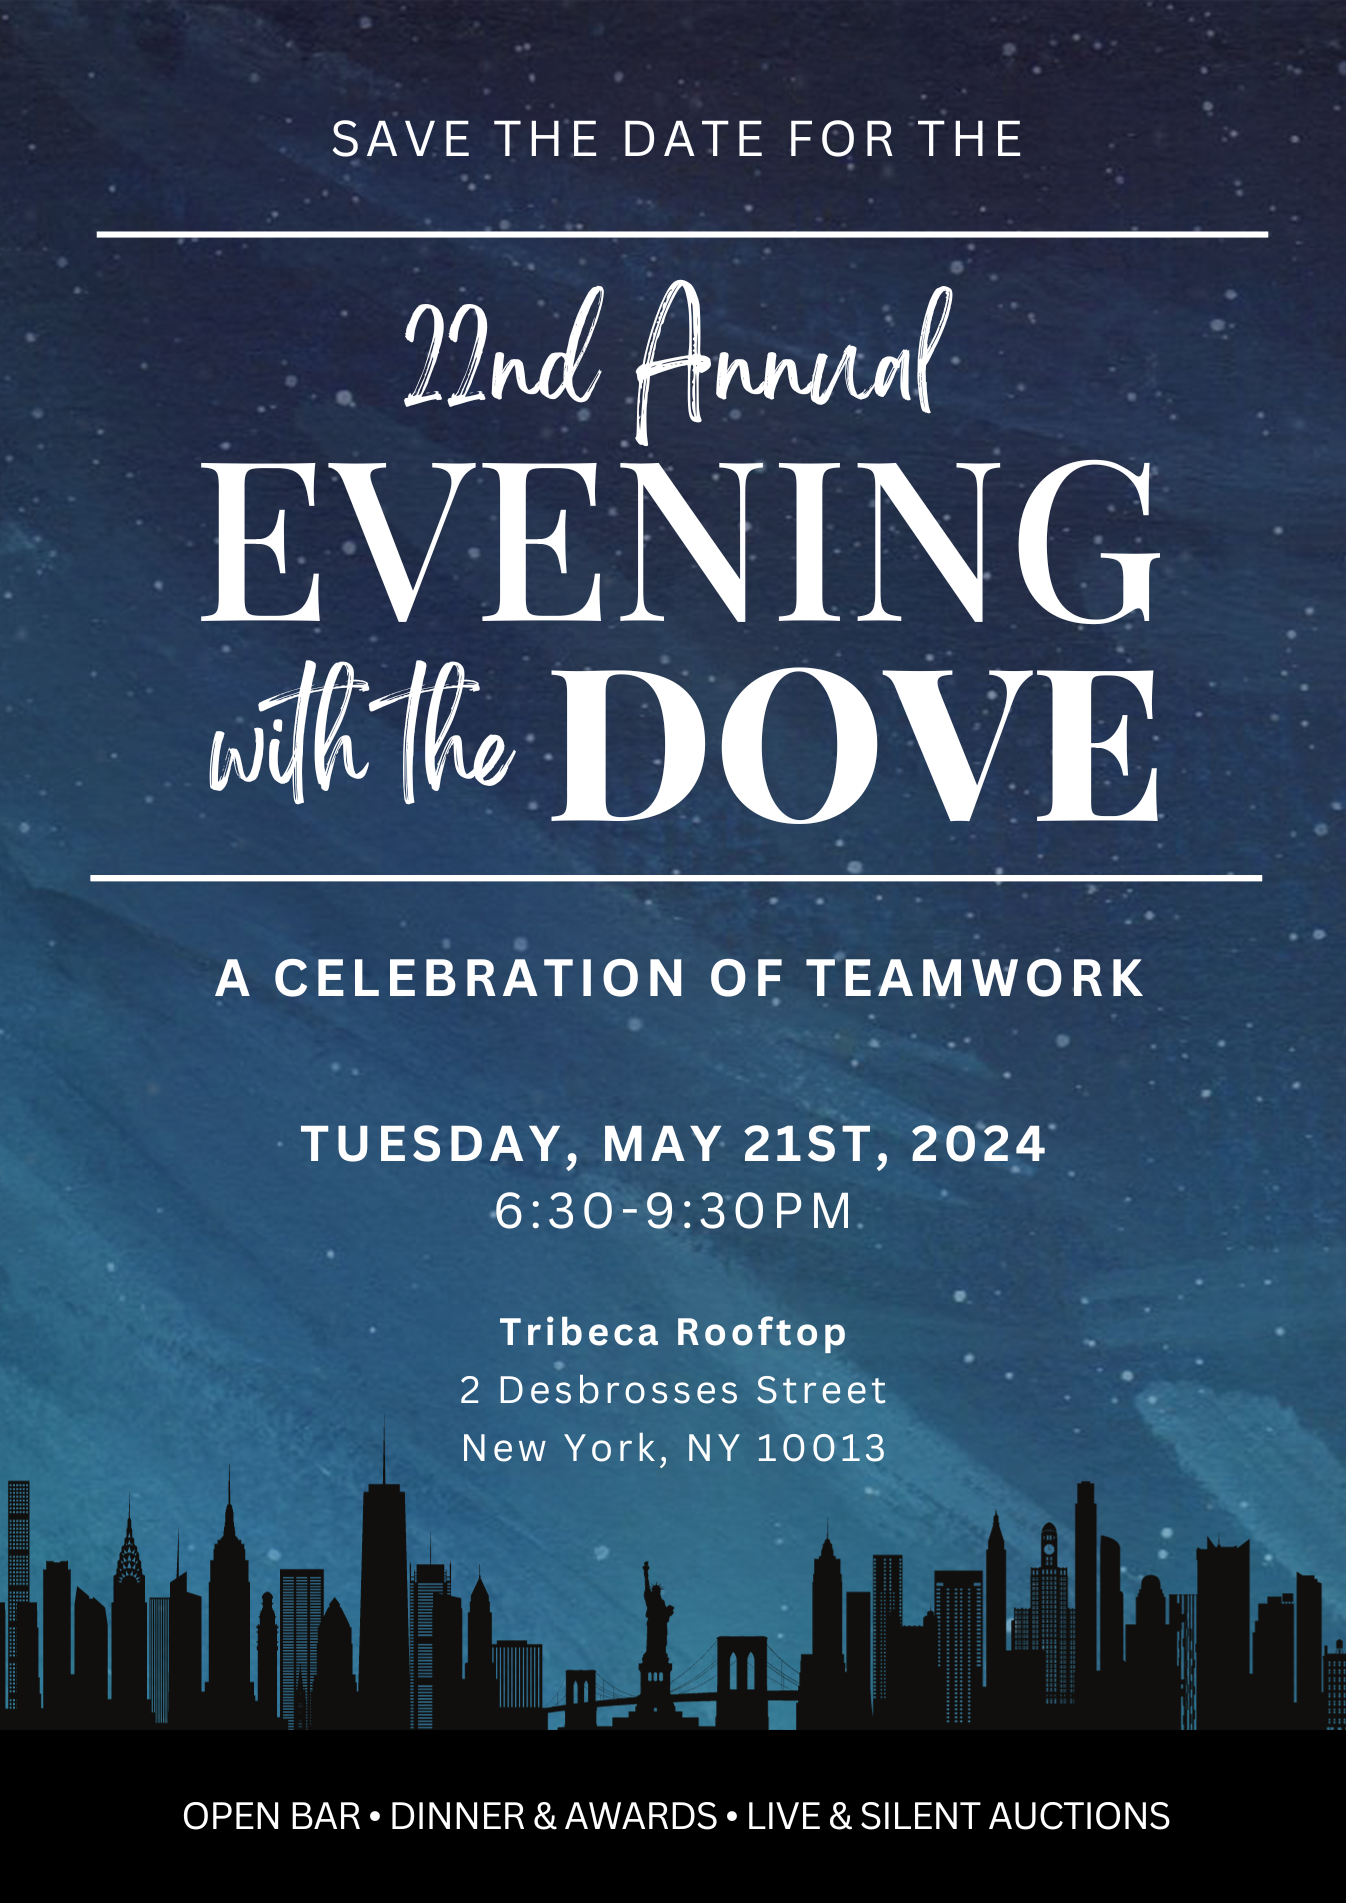 22nd Annual Evening with the Dove